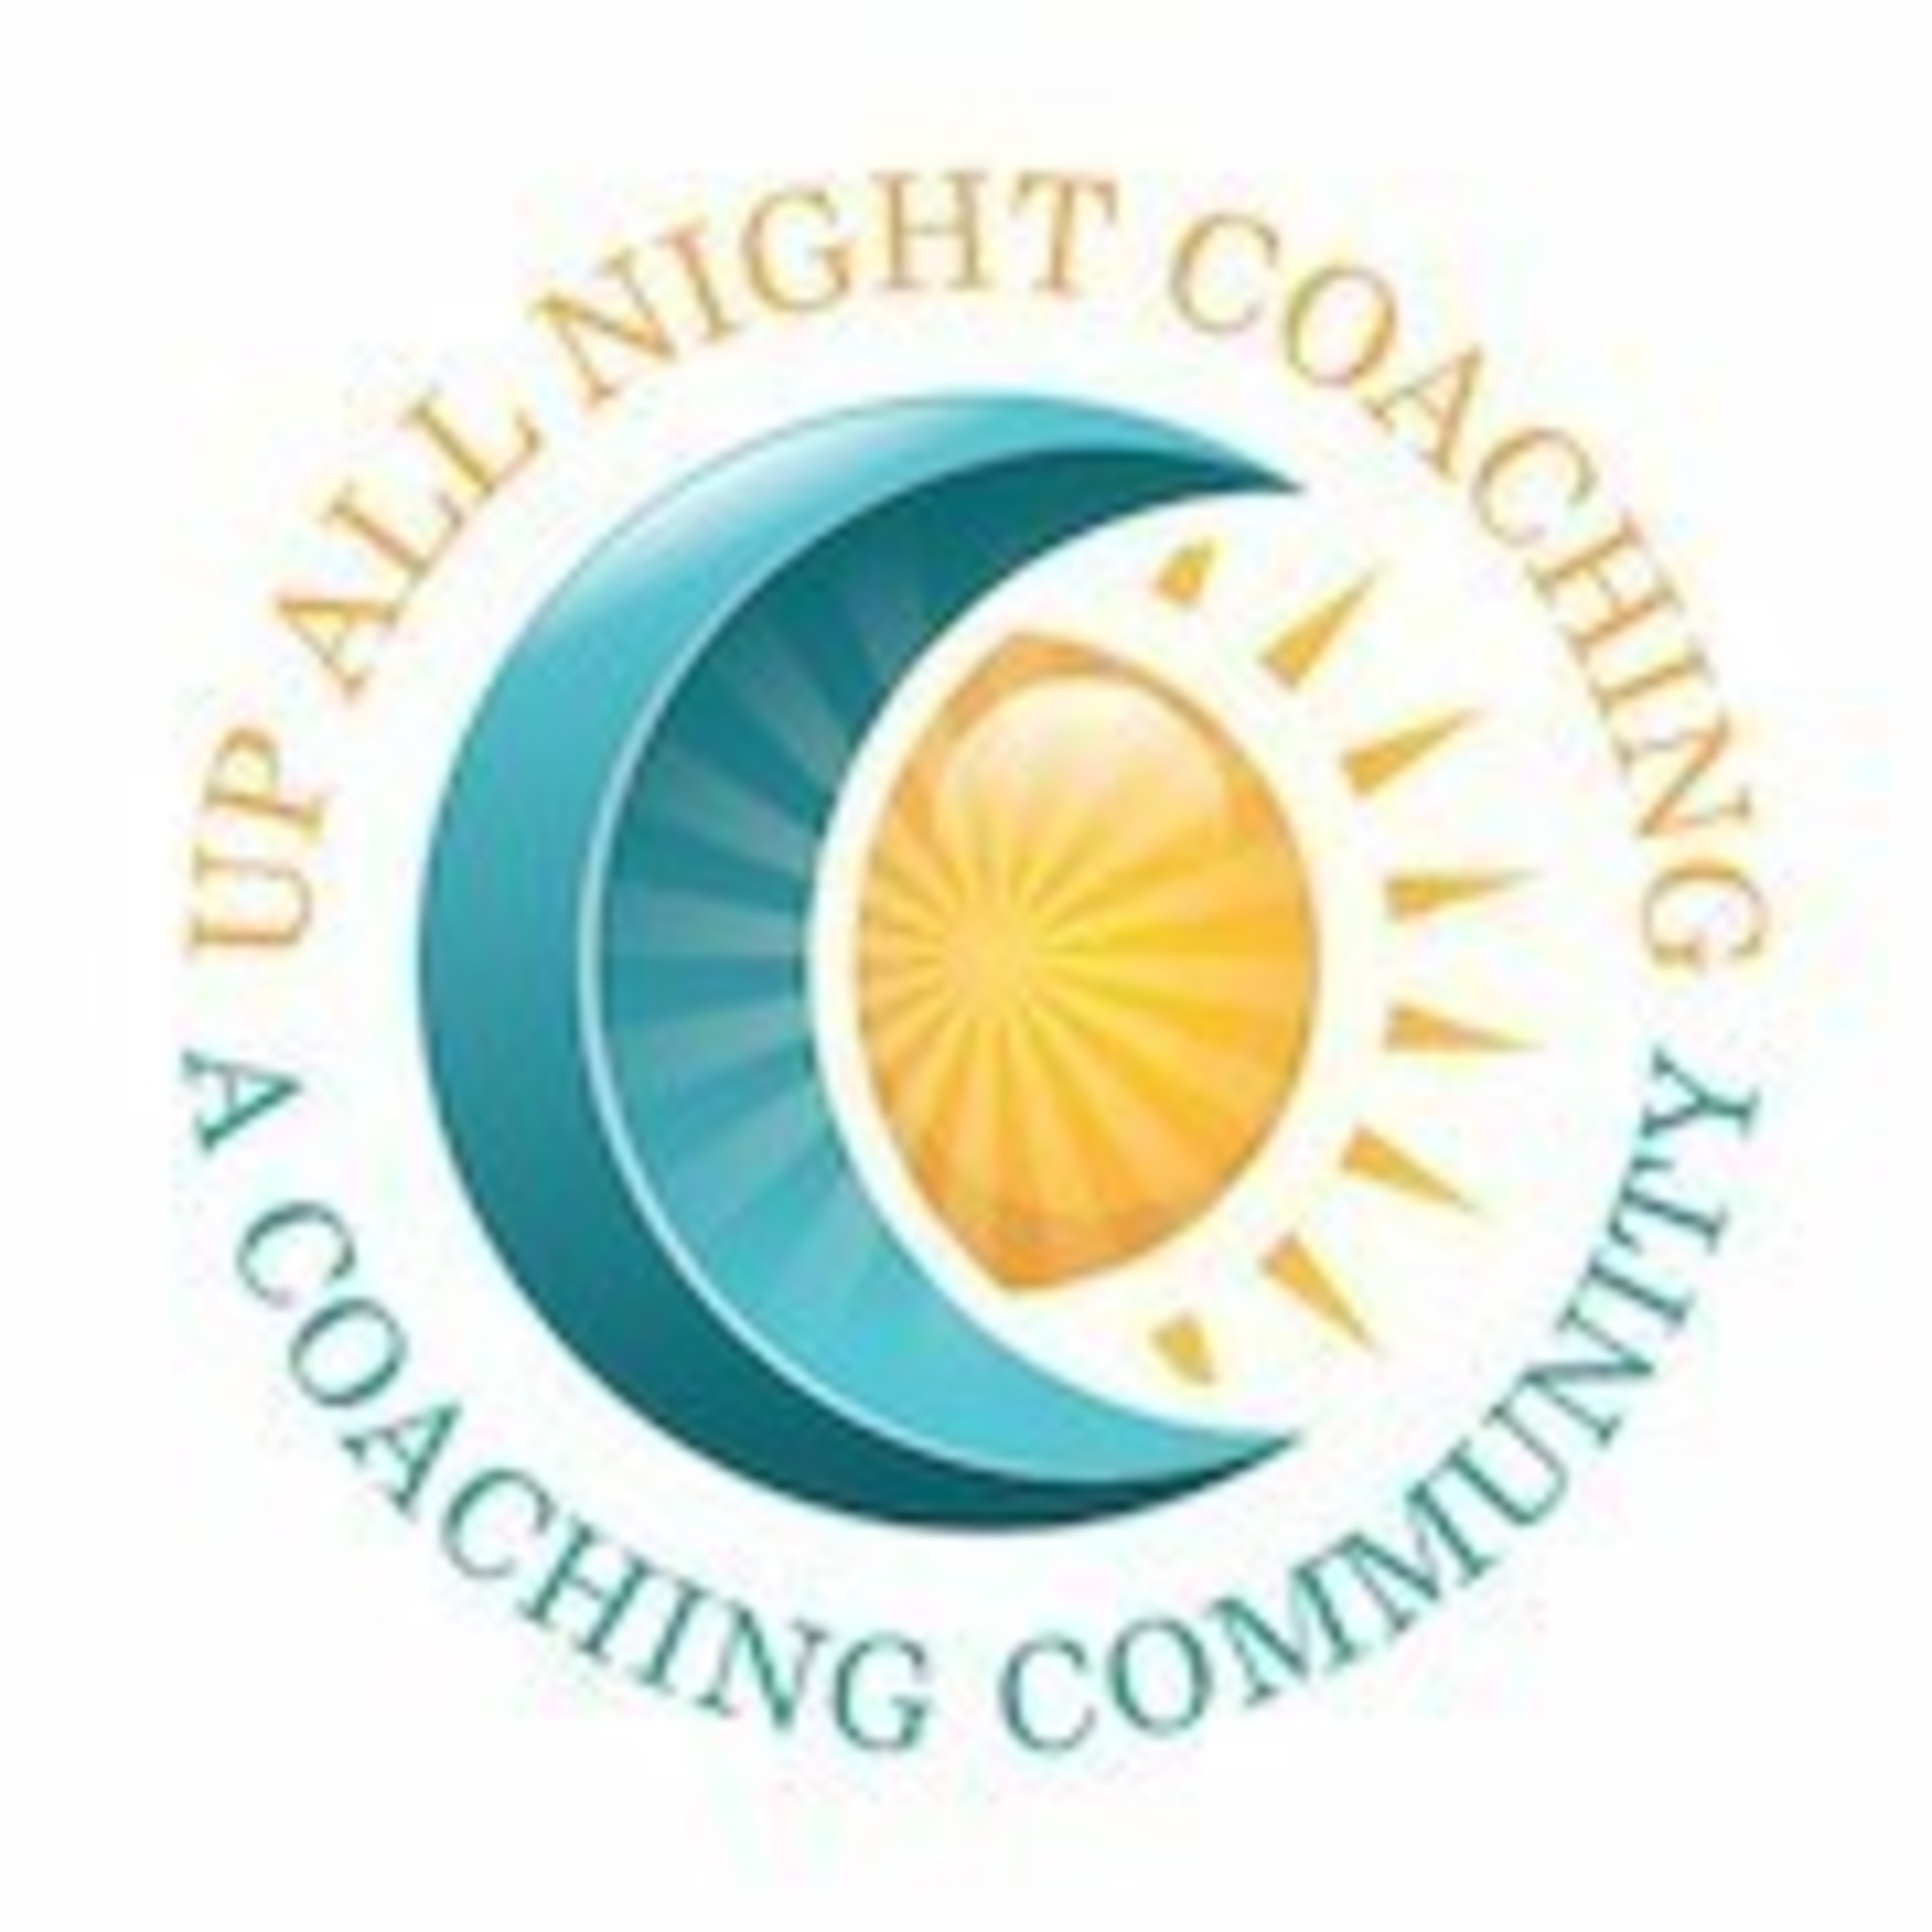 New Life Coaching Service Offers 24/7 Consultations Around the World